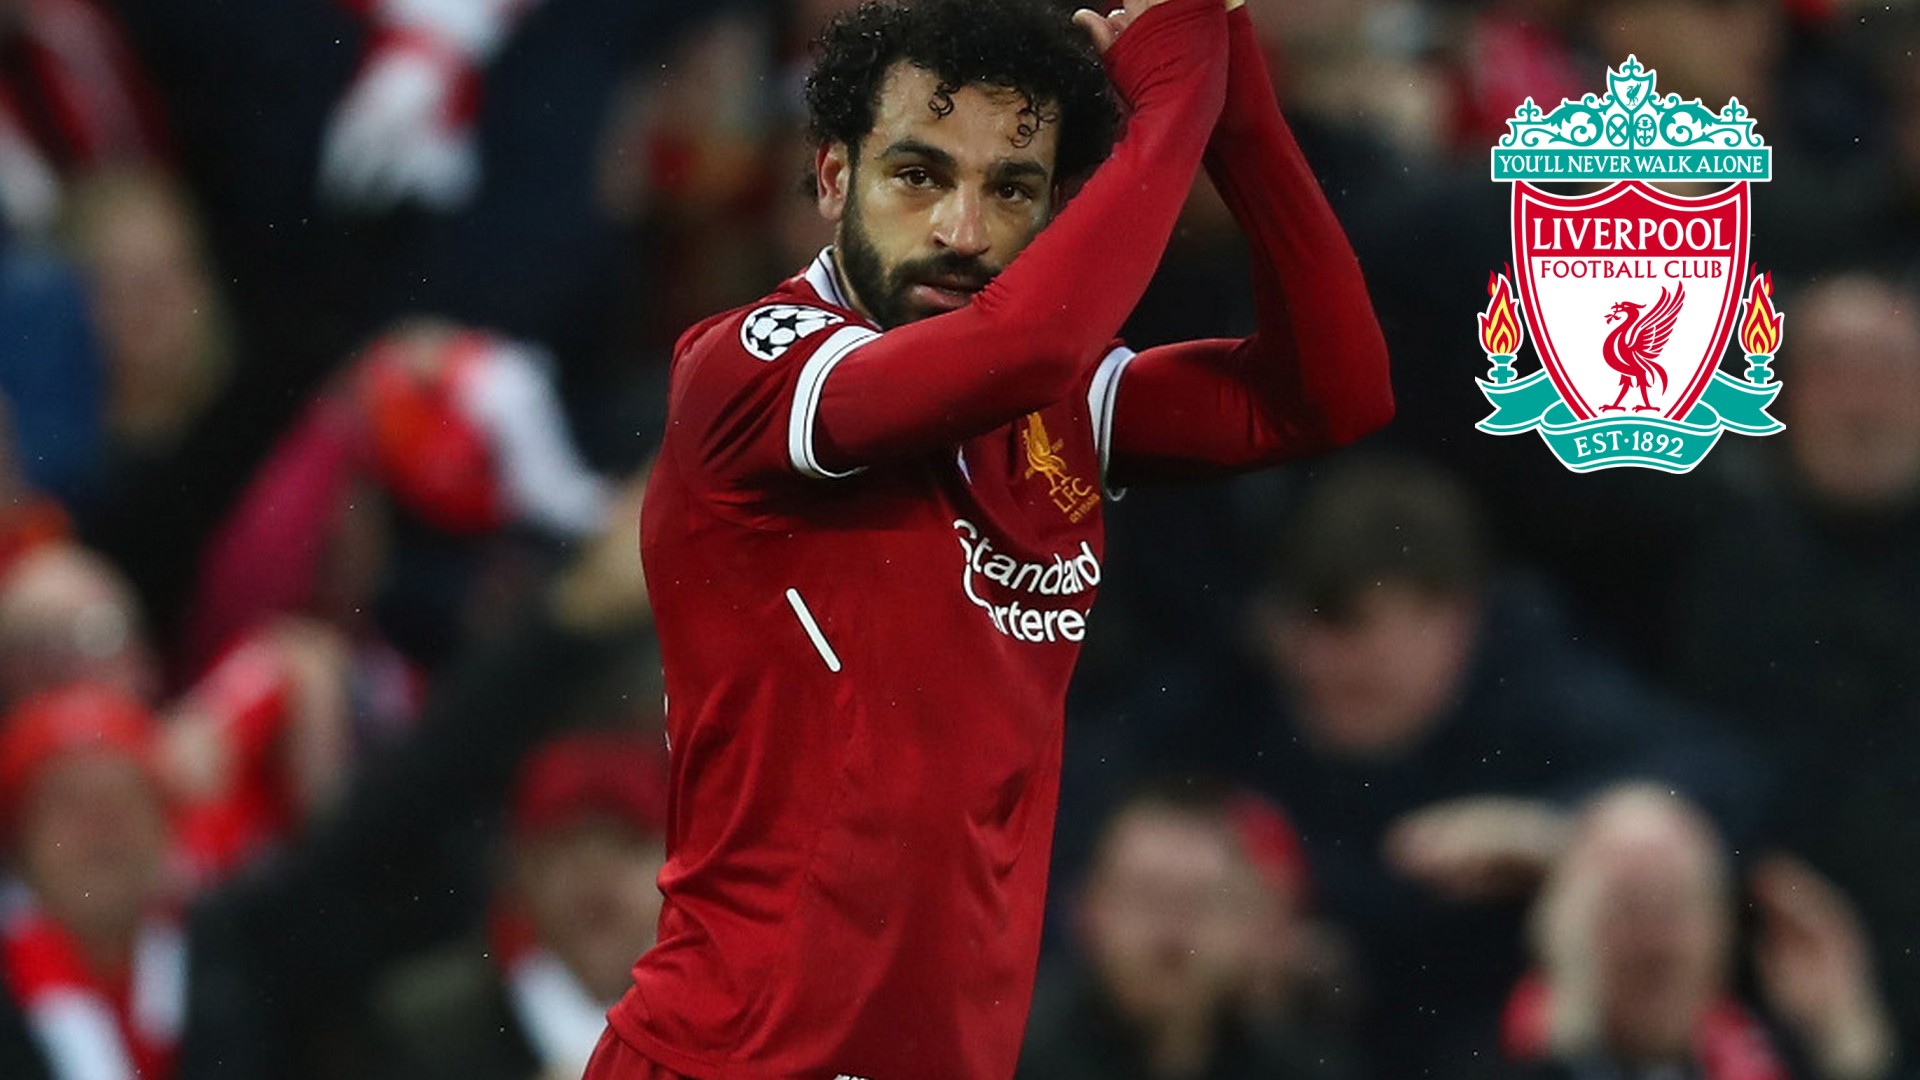 HD Wallpaper Mohamed Salah With Resolution 1920X1080 pixel. You can make this wallpaper for your Desktop Computer Backgrounds, Mac Wallpapers, Android Lock screen or iPhone Screensavers